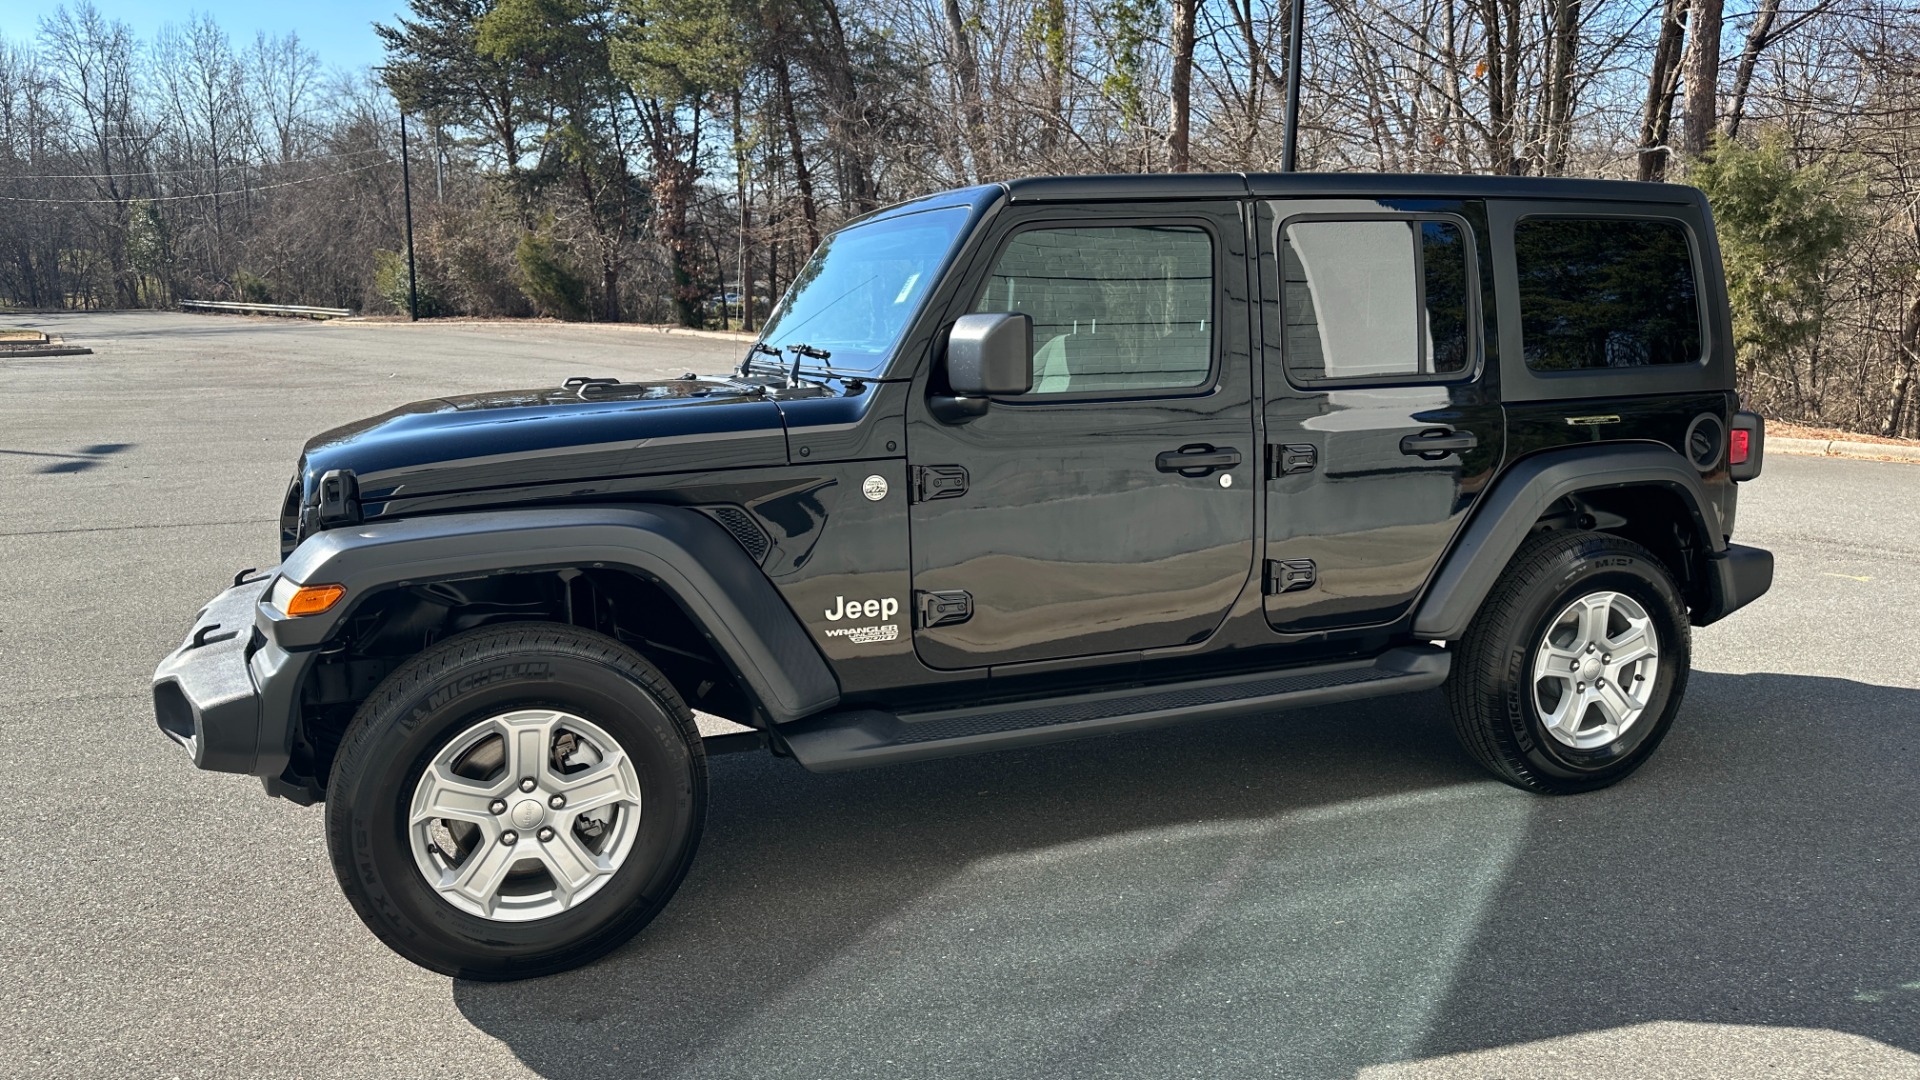 Used 2020 Jeep Wrangler Unlimited SPORT S / TECH PACKAGE / S PACKAGE / BLACK 3 PIECE HARD TOP for sale $25,995 at Formula Imports in Charlotte NC 28227 6